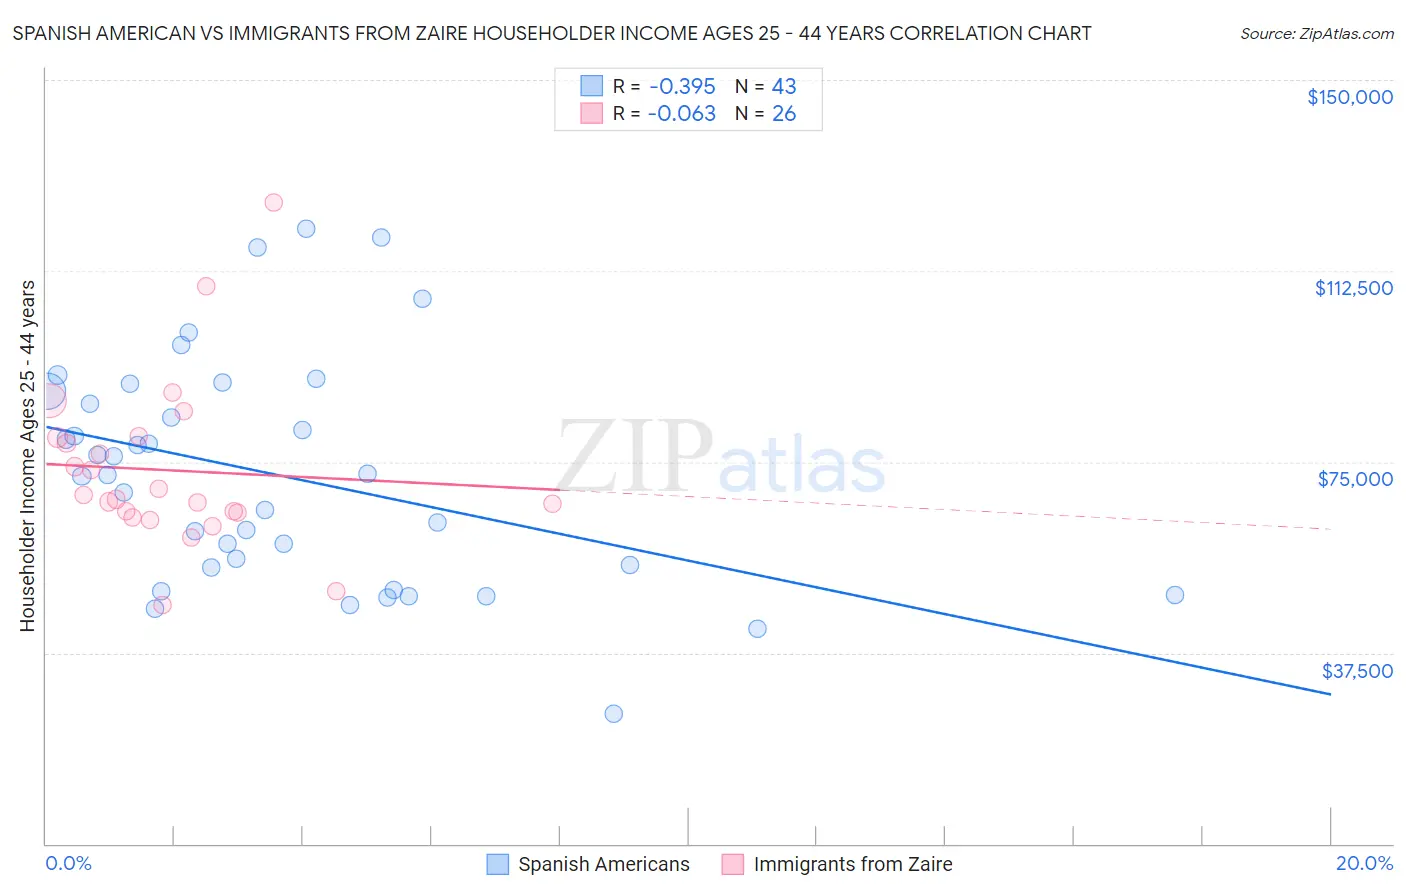 Spanish American vs Immigrants from Zaire Householder Income Ages 25 - 44 years